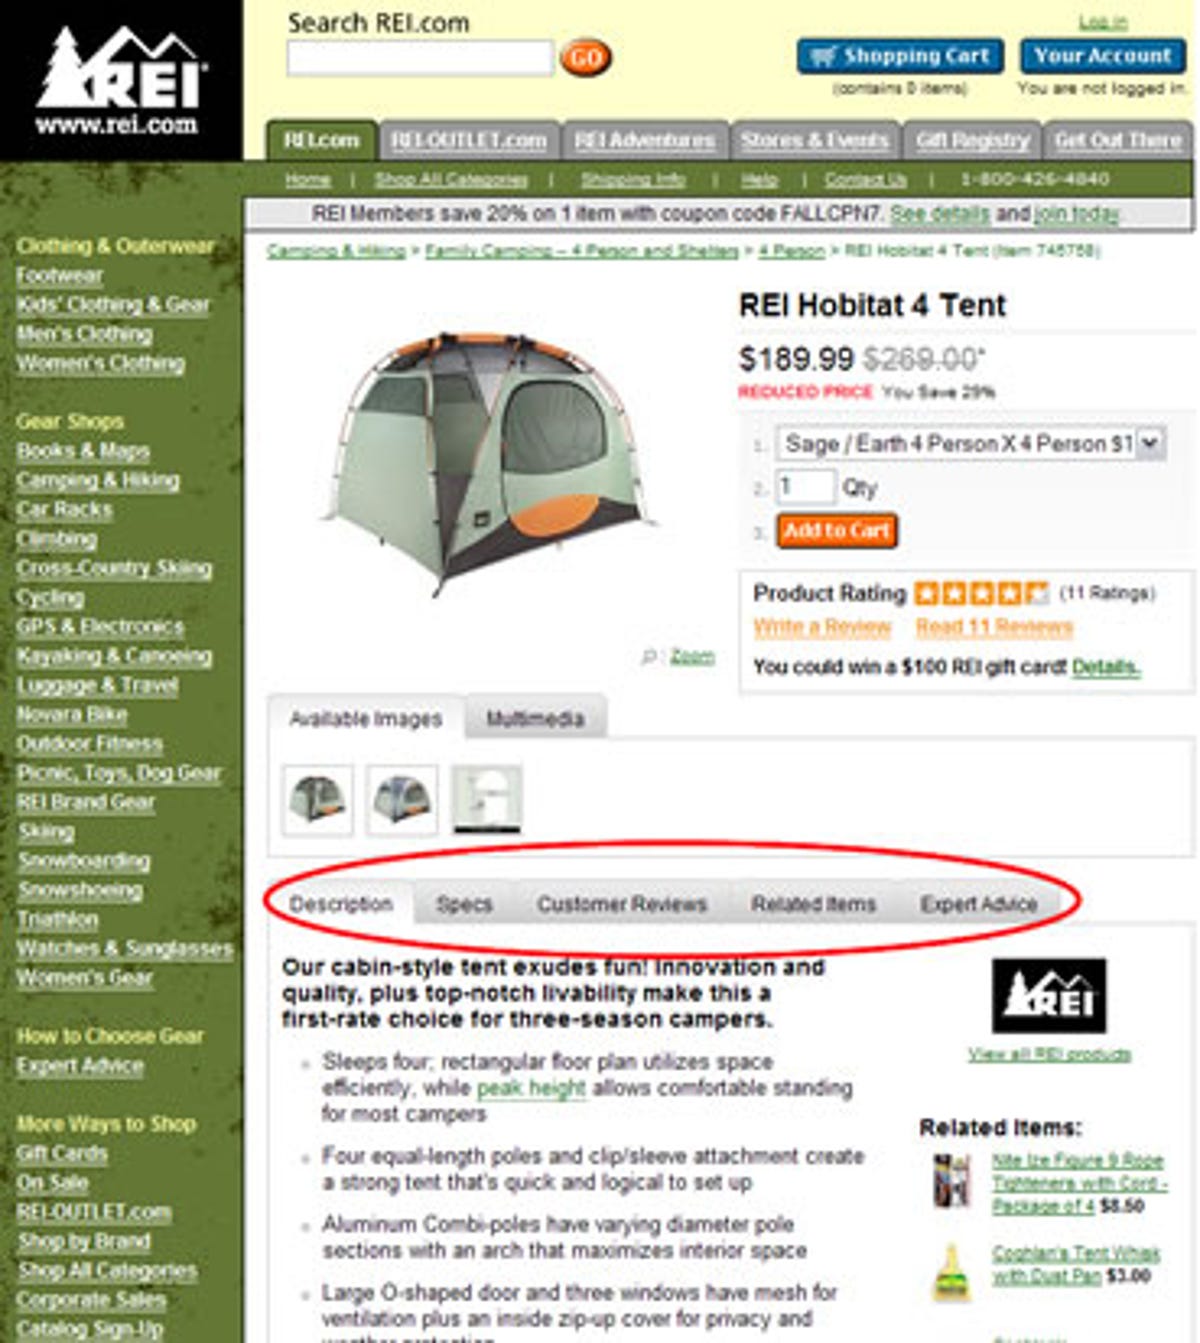 REI tabbed content sections on product detail pages.